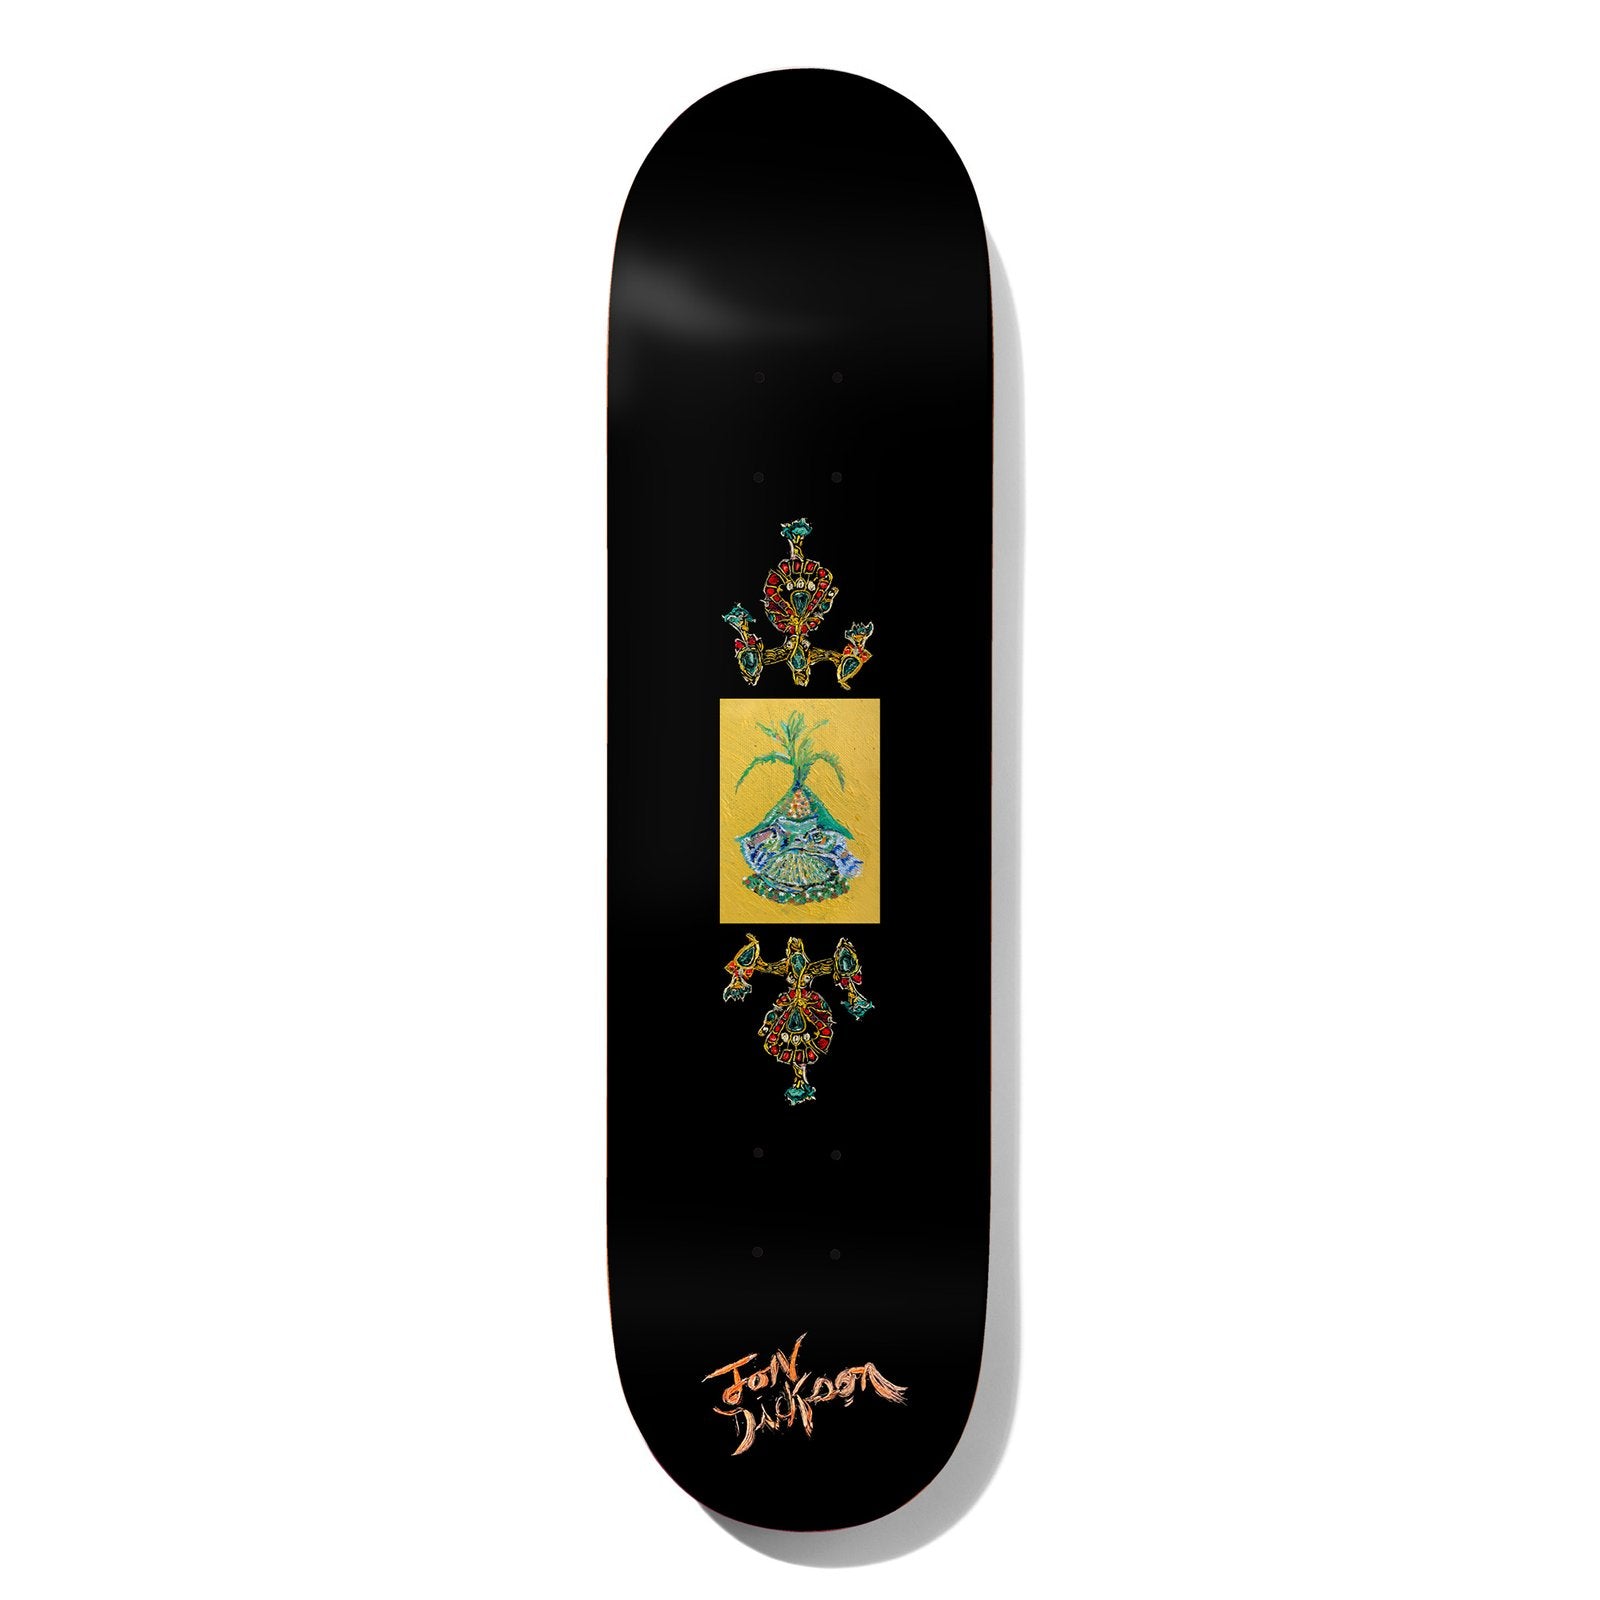 DEATHWISH DECK - JD SEE THE MOON DECK (8.5")